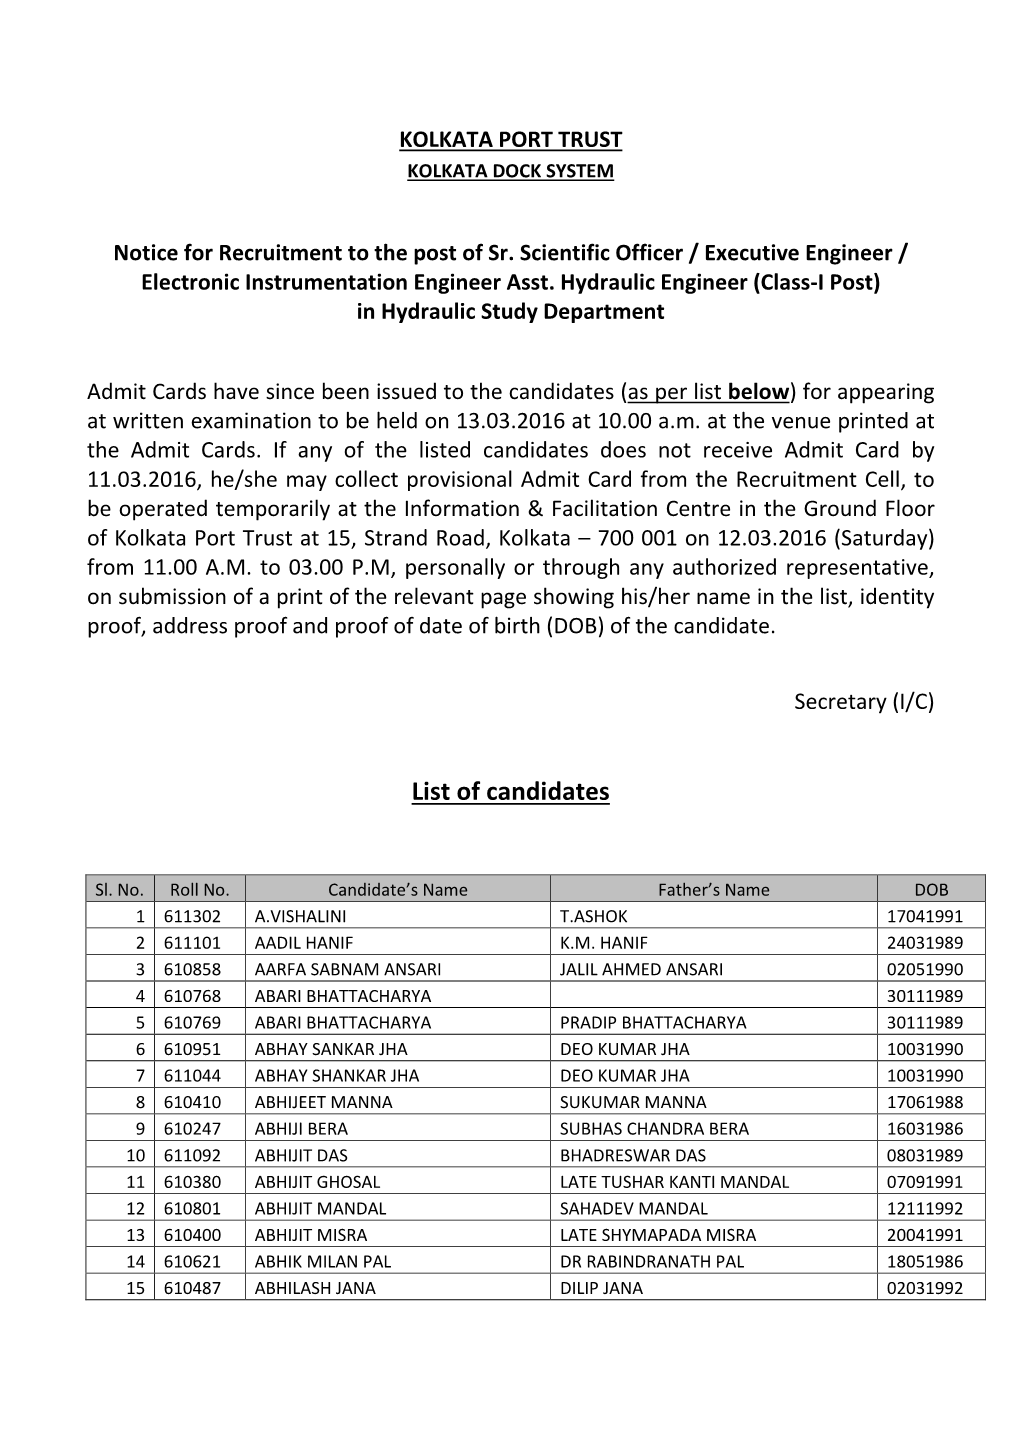 Revised List Officers-HSD for Exam-13.03.16